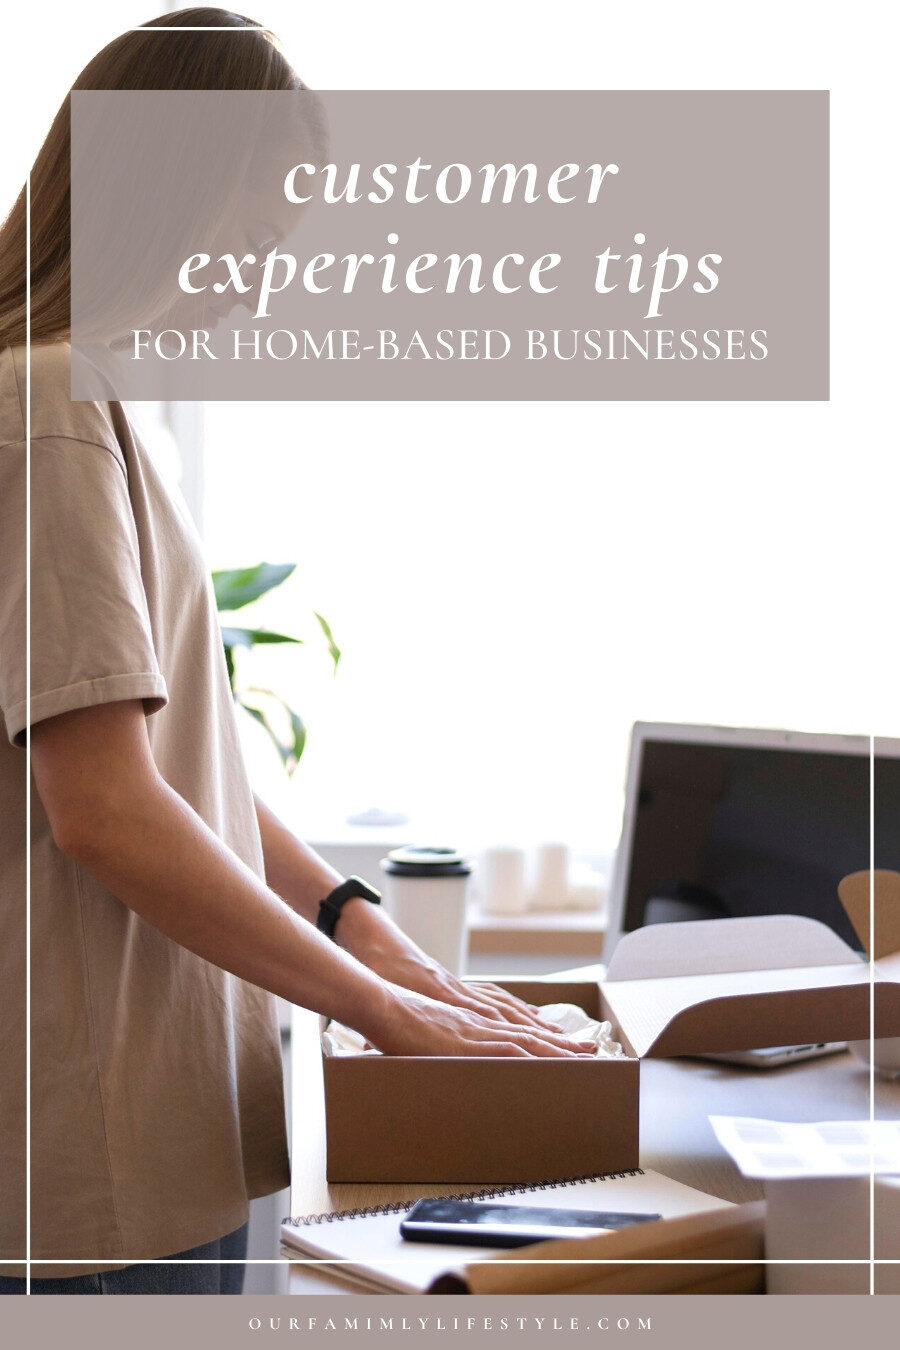 Amazing Customer Experience Tips For Home-Based Businesses